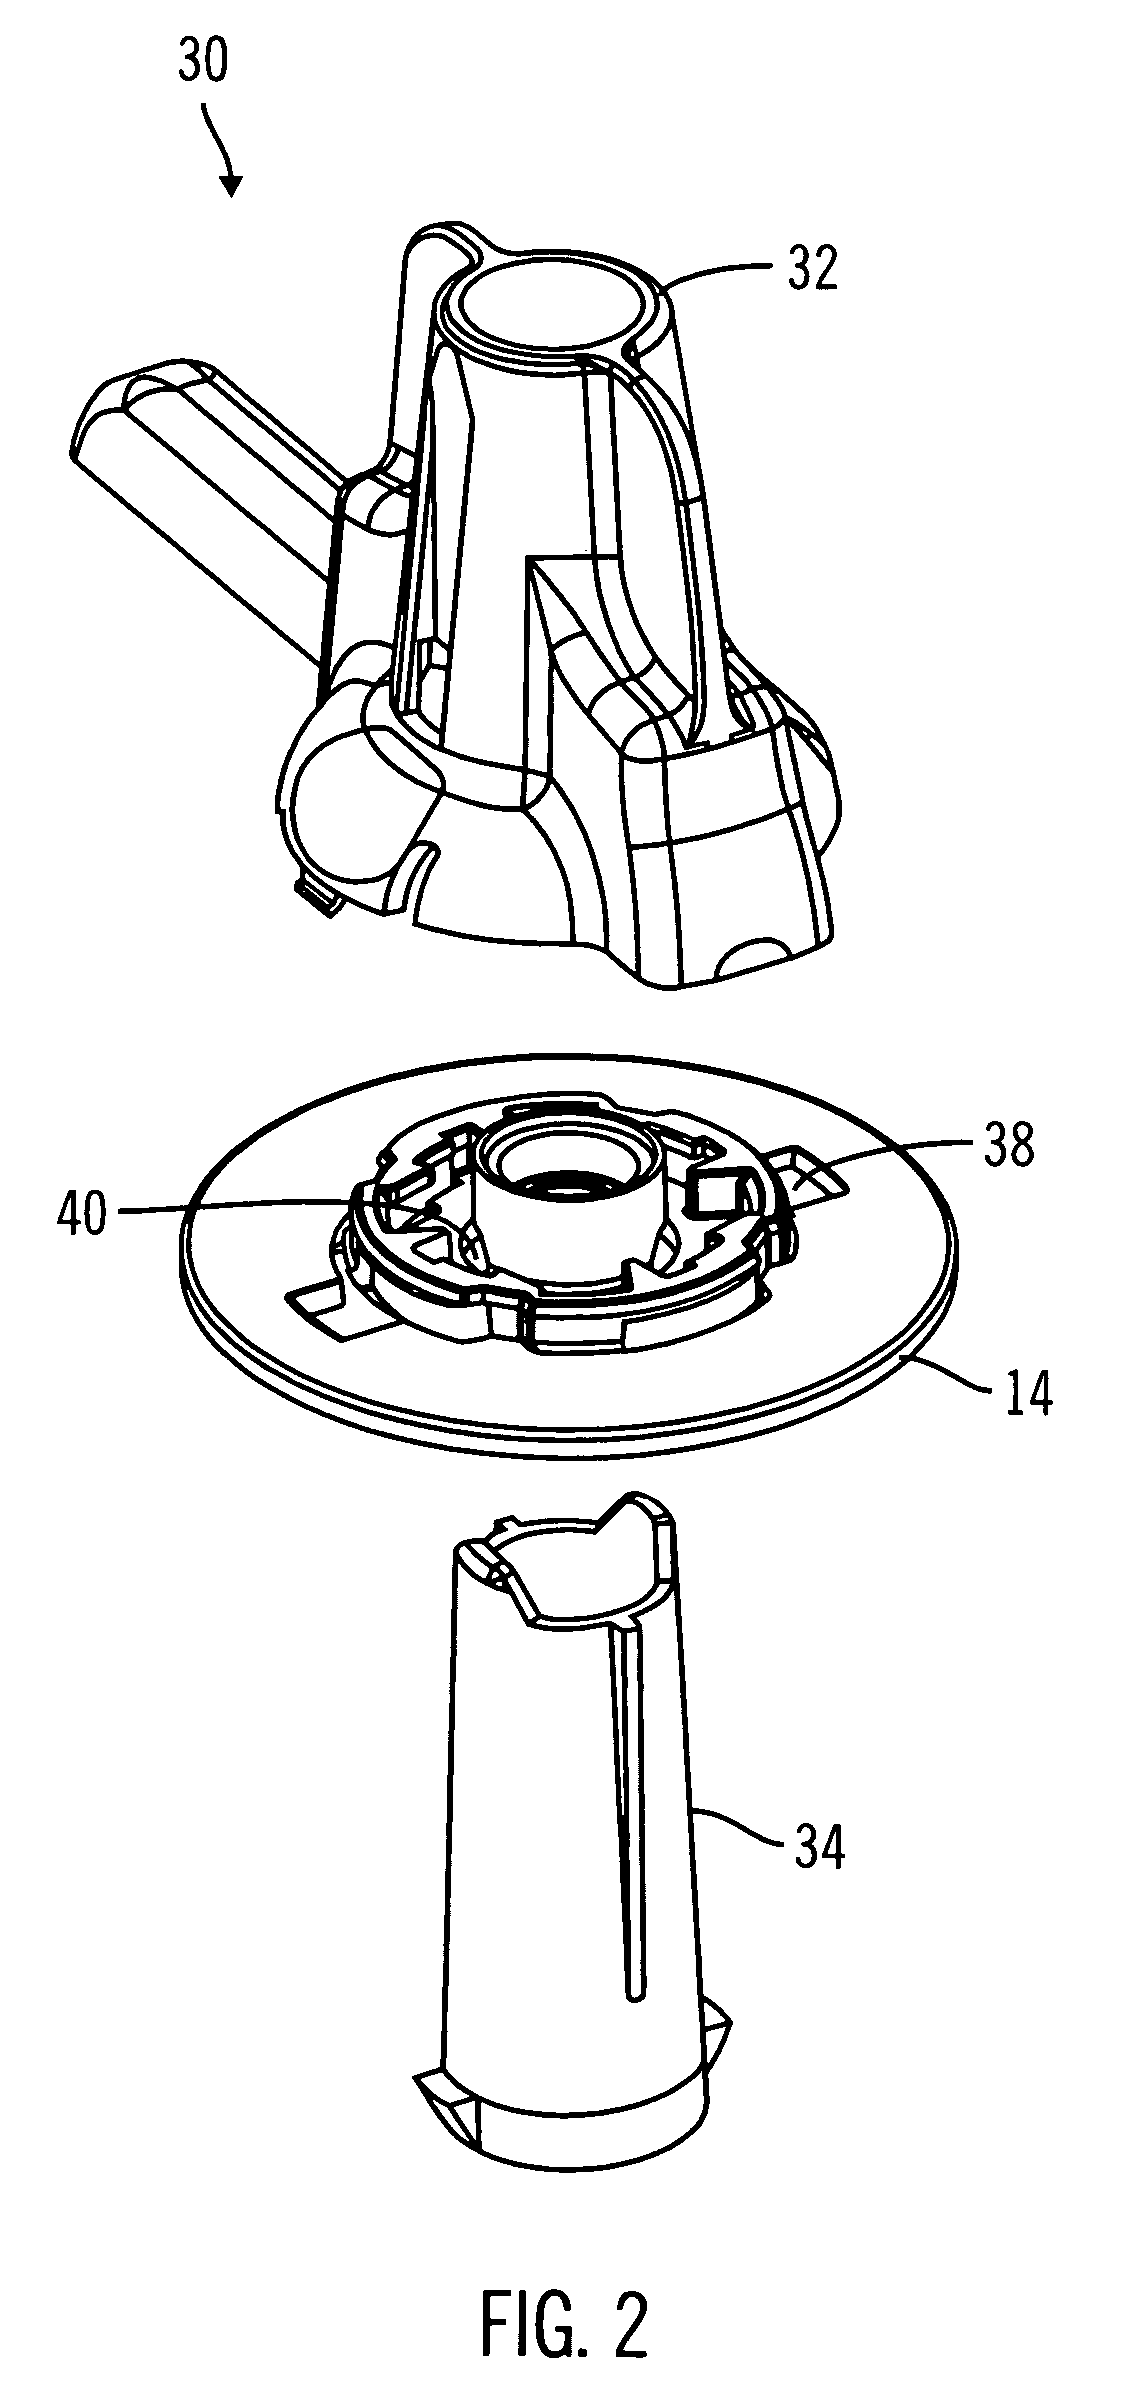 Multi-position infusion set device and process